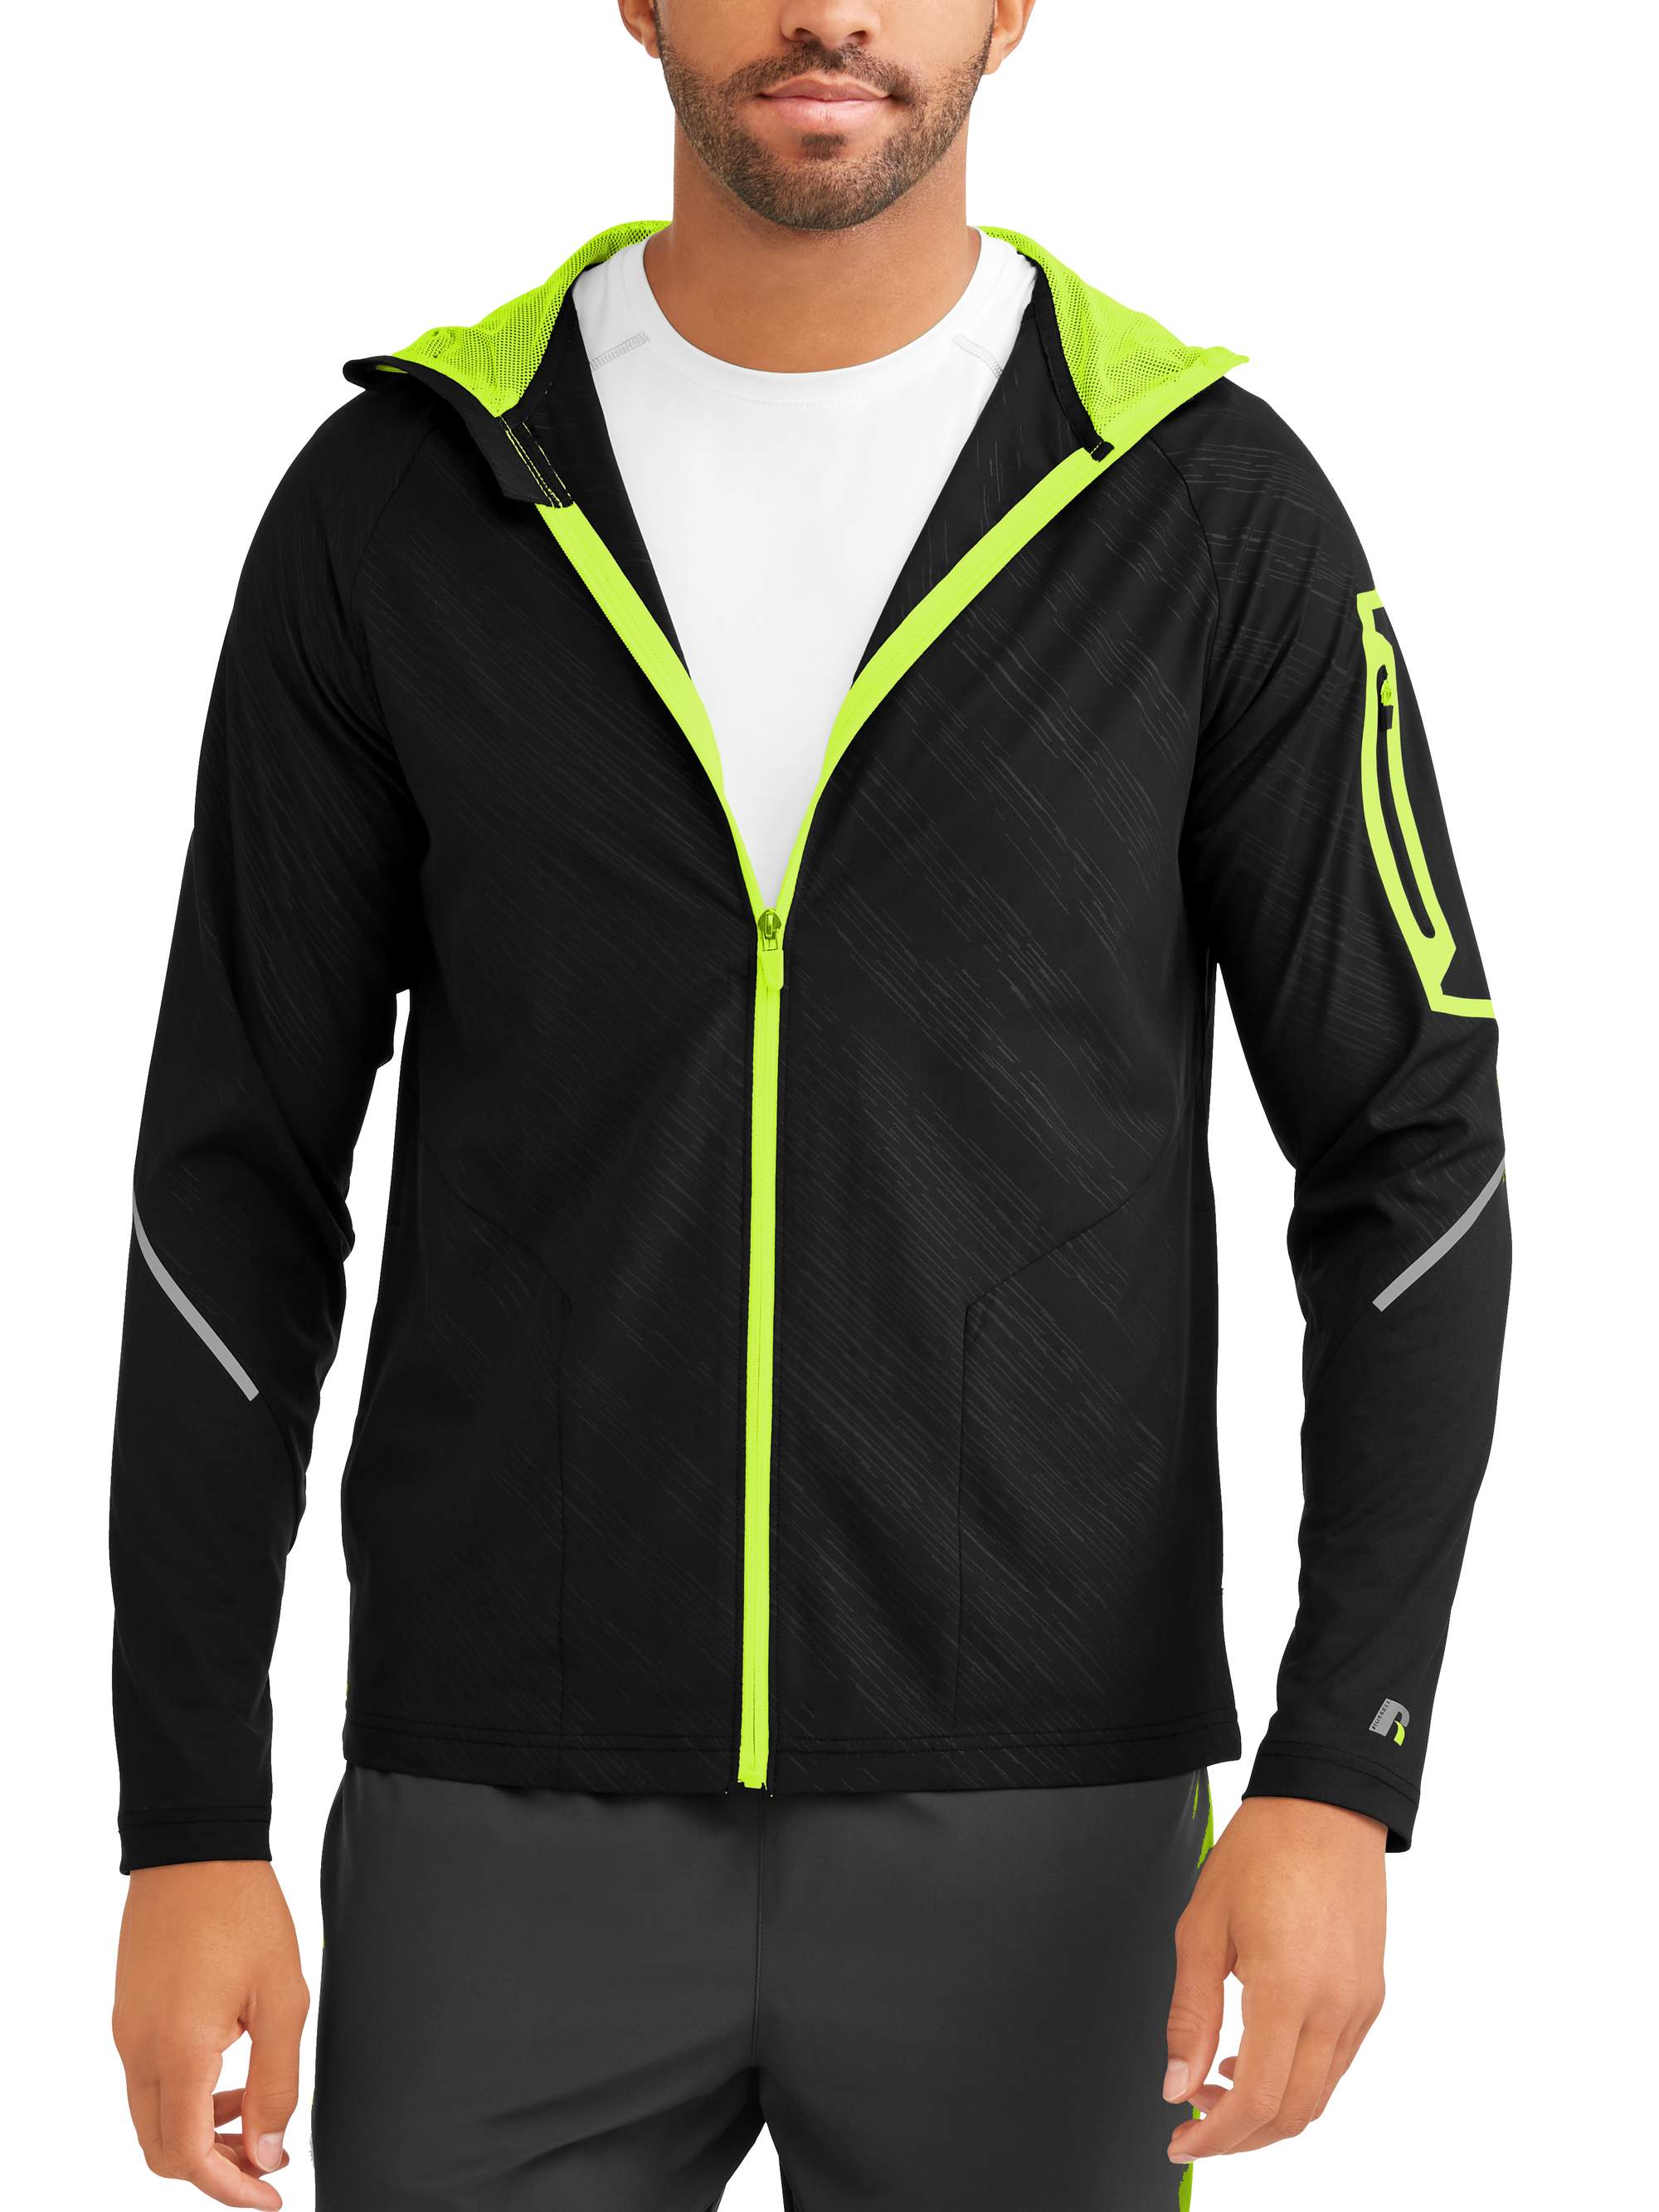 Russell Exclusive Men's Core Performance Jacket - image 1 of 7